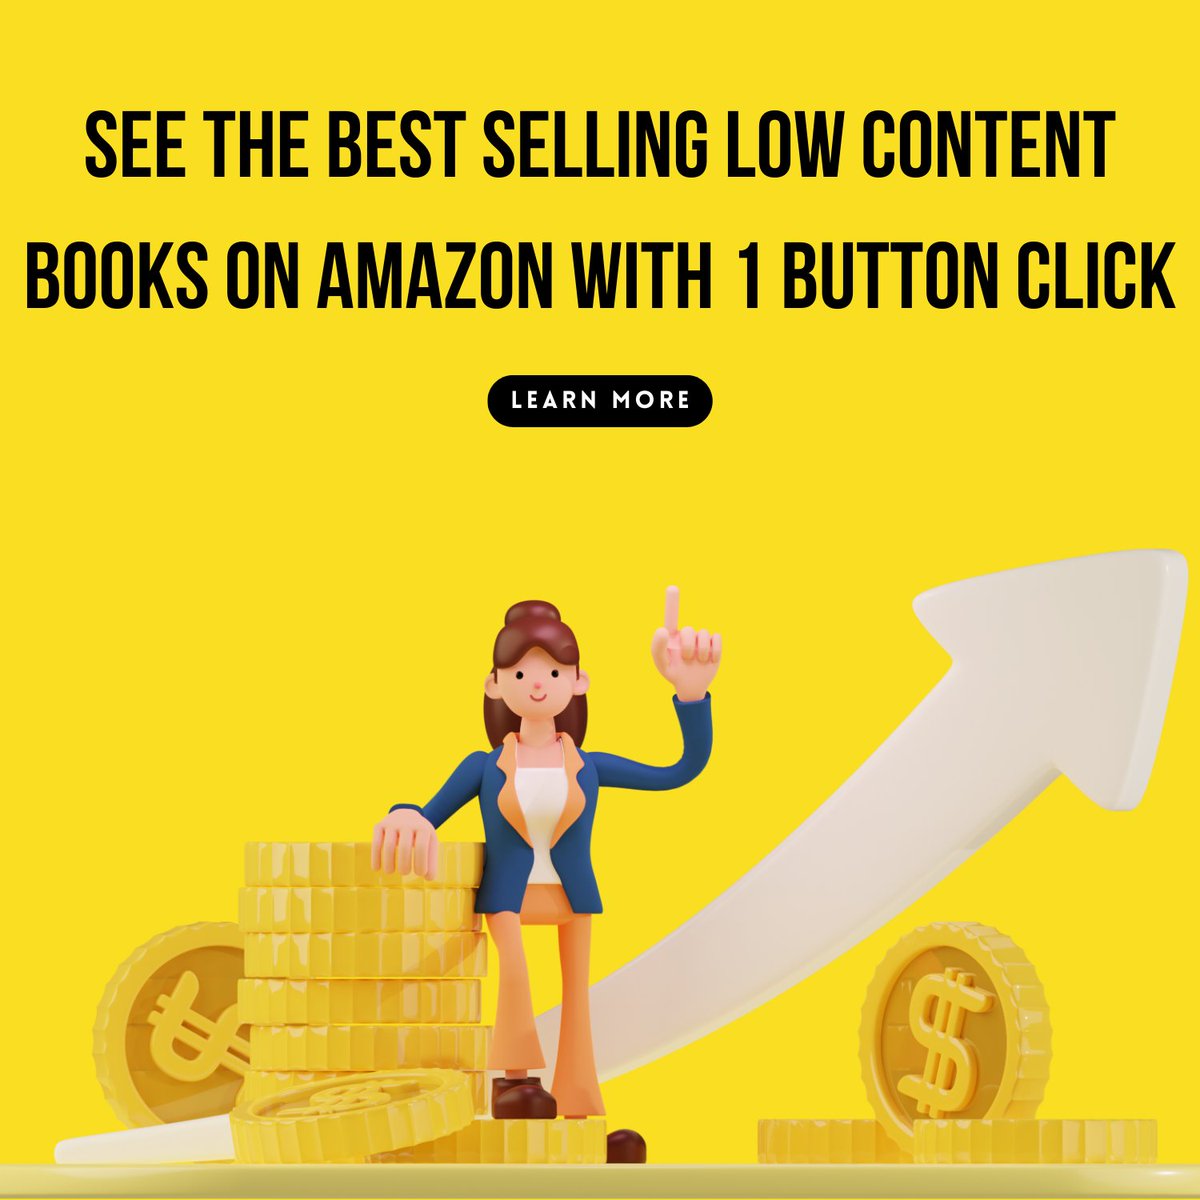 bookbolt.io/1596.html See The Best Selling Low Content Books On Amazon With 1Click #book #bookinteriors #covers #design #kdpbook #bookbold #bookcovers #lowcontentbooks #lowcontentniches #listkdpbooks #Amazon #amazonsearchvolume #kdpkeywords #designer #uiux #designthinking